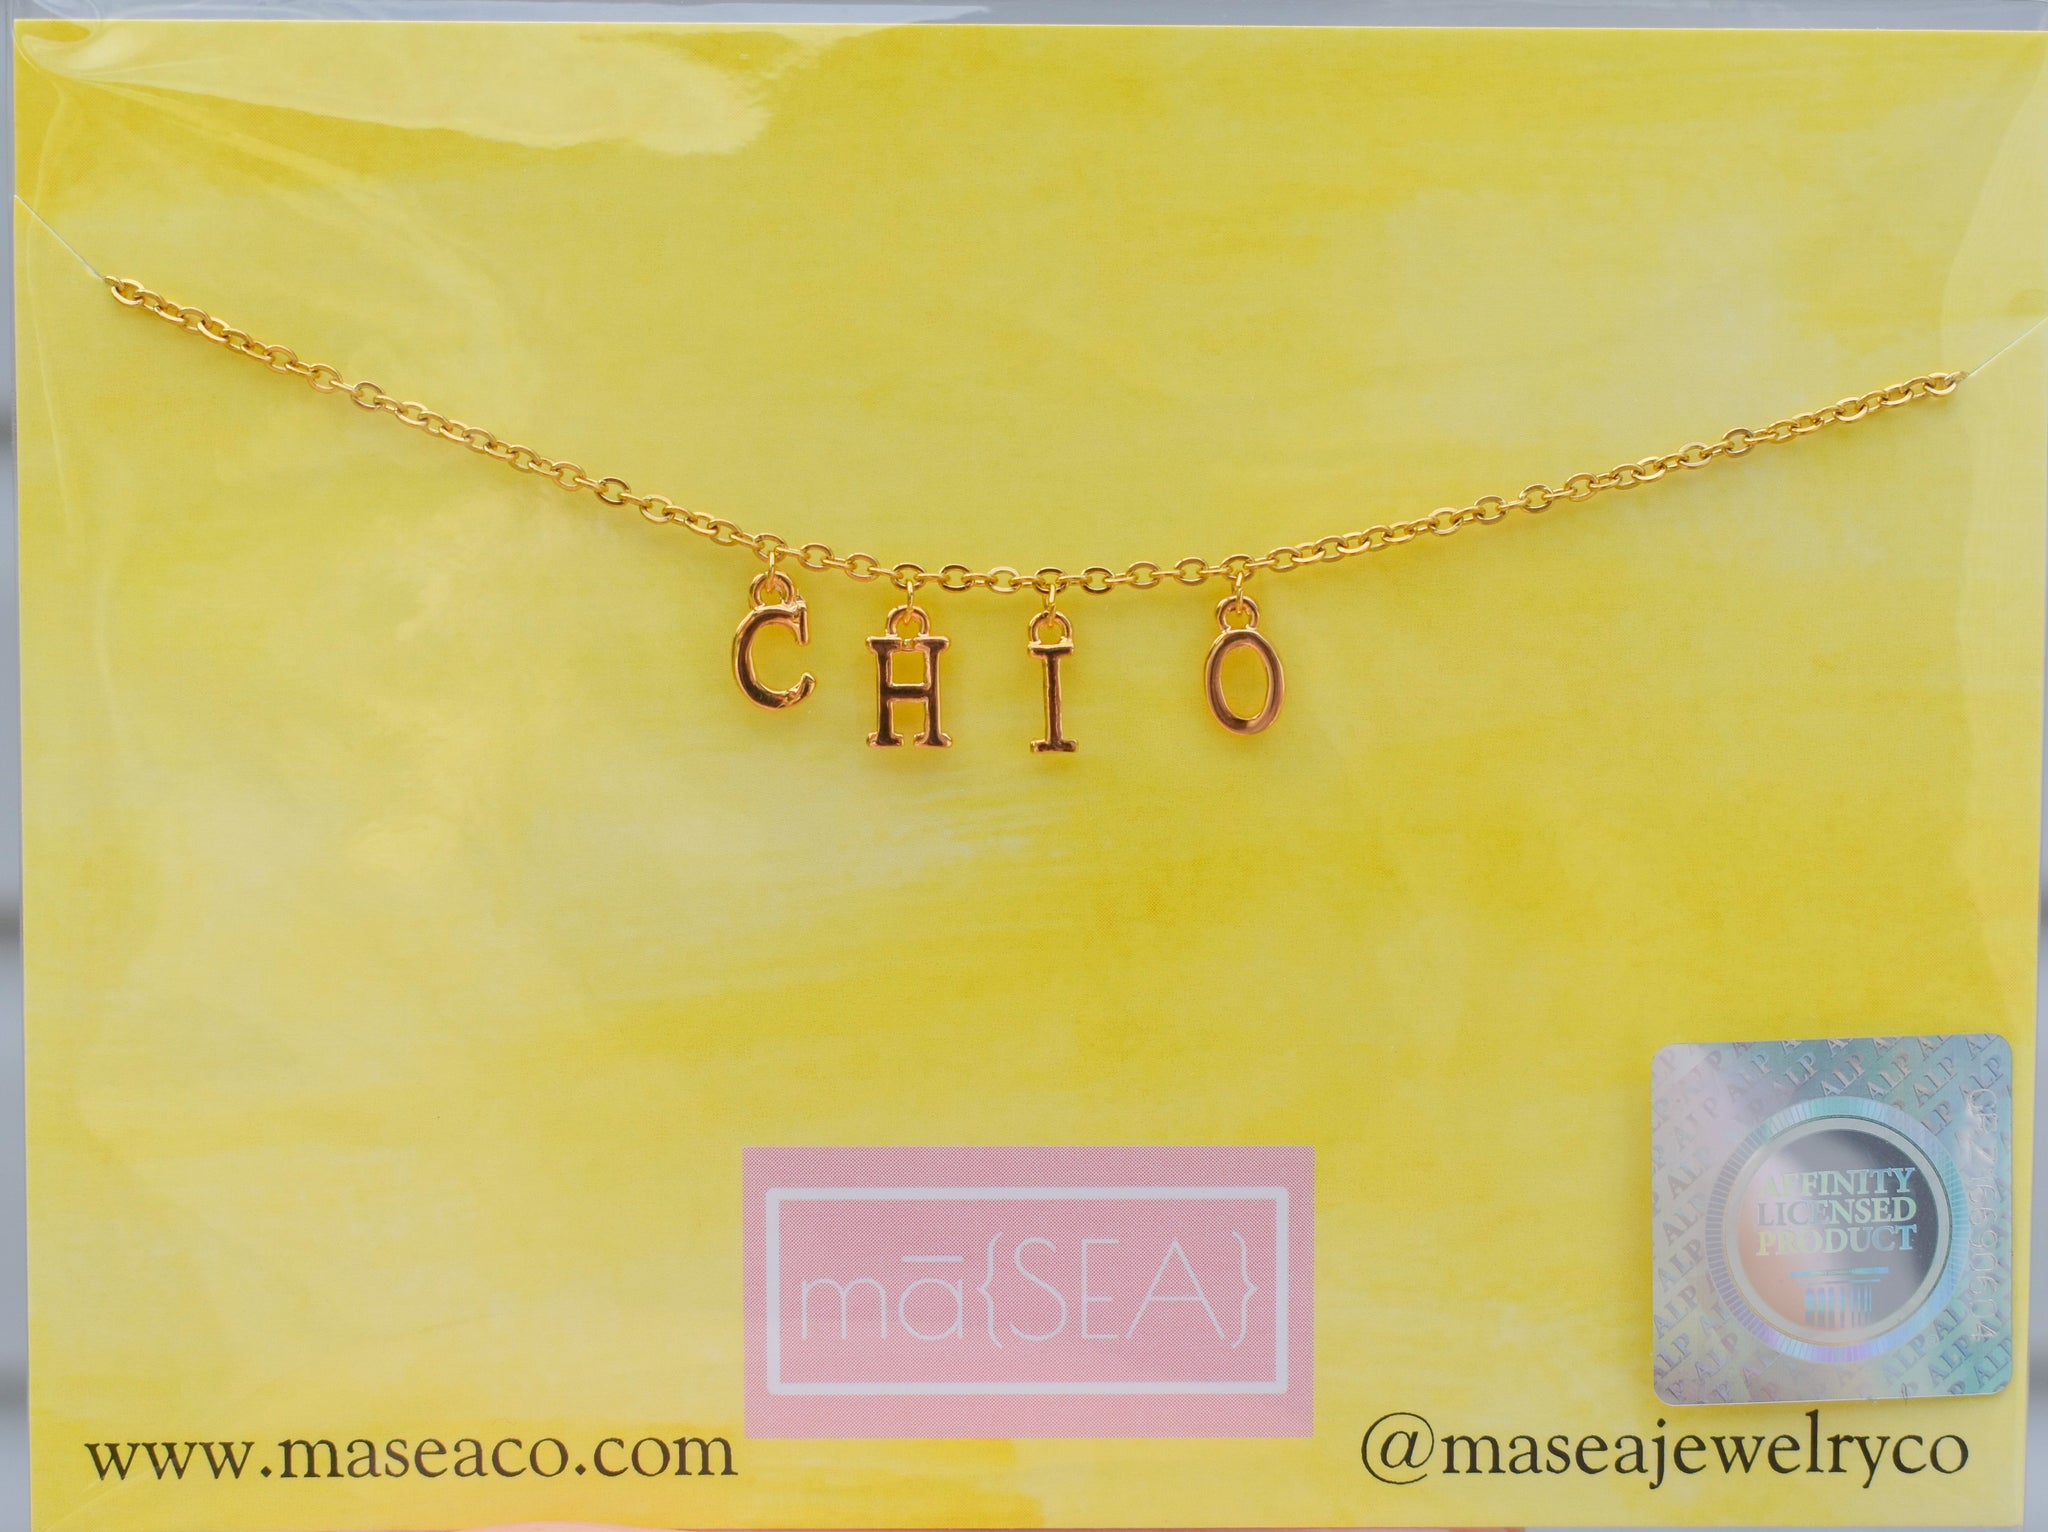 Chi Omega Sterling Silver Necklace with Greek Letter Charm | M.LaHart & Co.